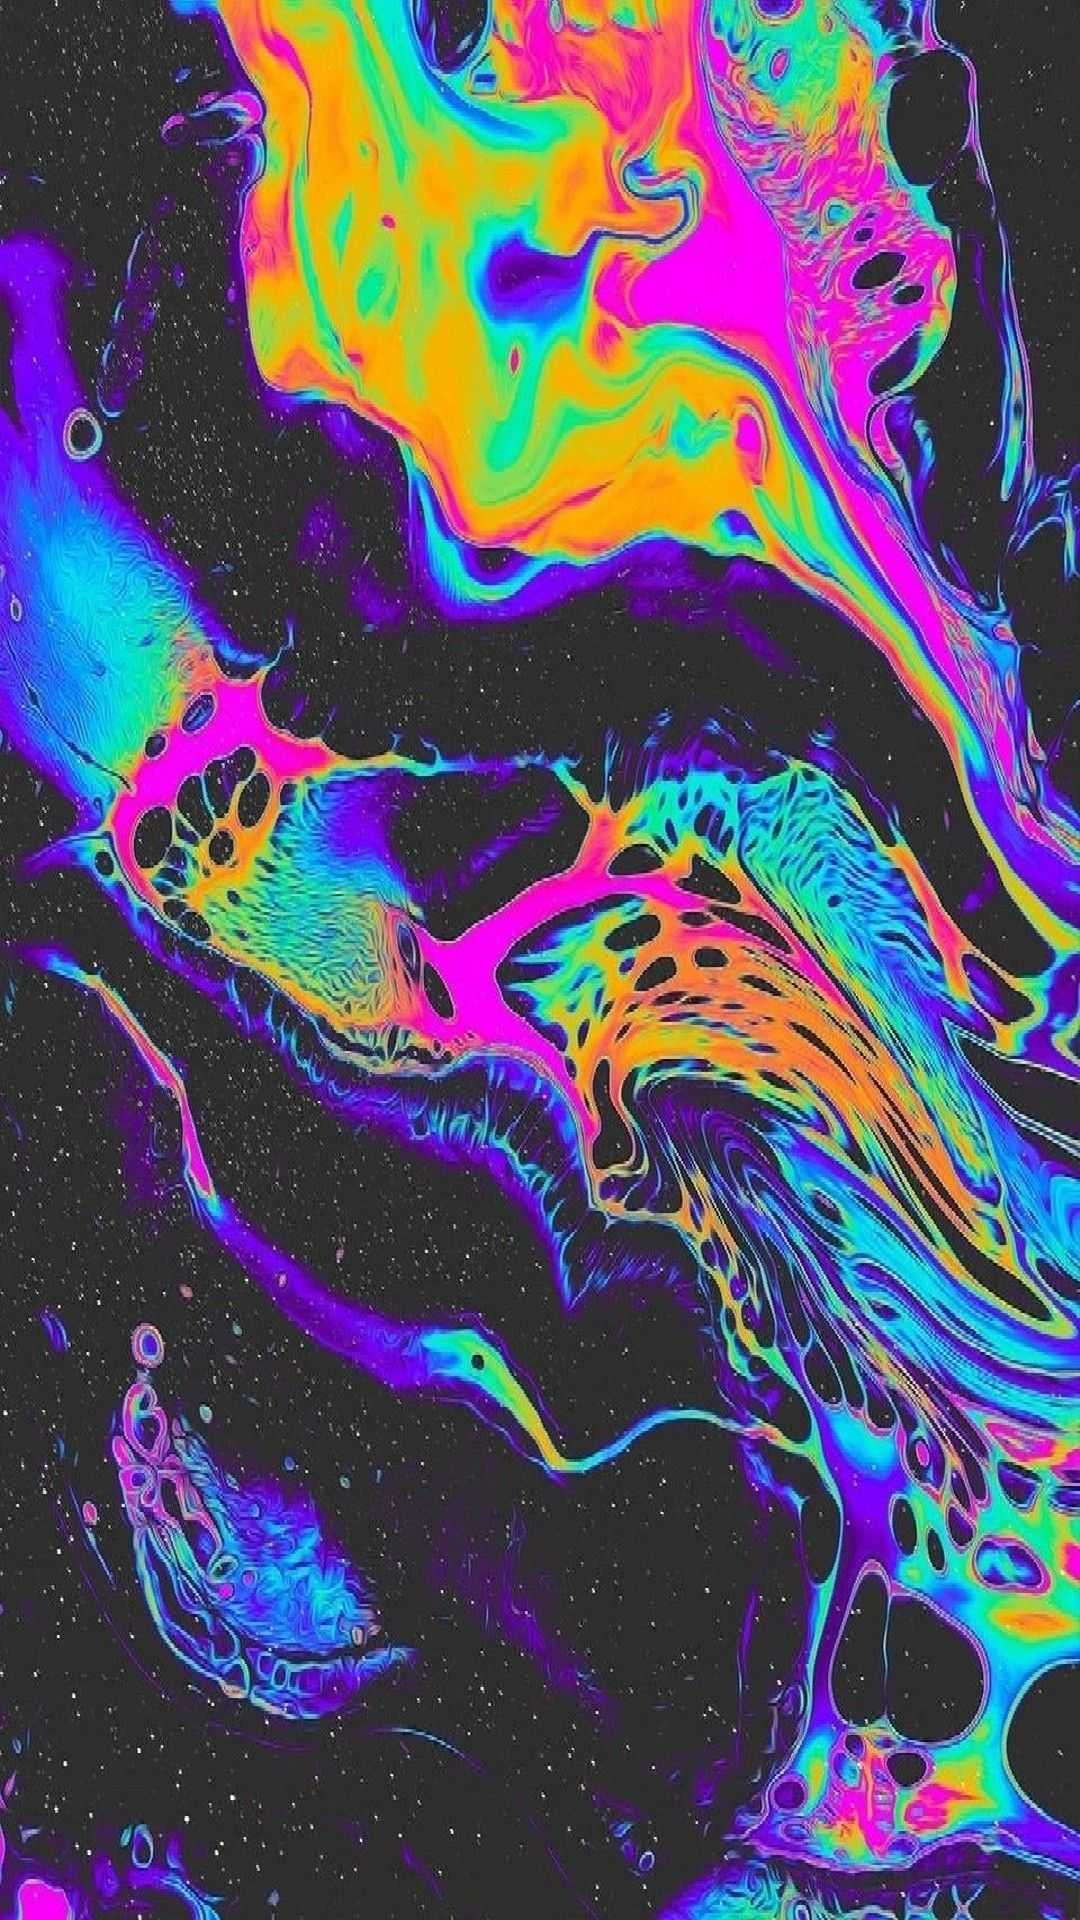 Aesthetic Trippy iPhone Wallpaper with high-resolution 1080x1920 pixel. You can use this wallpaper for your iPhone 5, 6, 7, 8, X, XS, XR backgrounds, Mobile Screensaver, or iPad Lock Screen - Galaxy